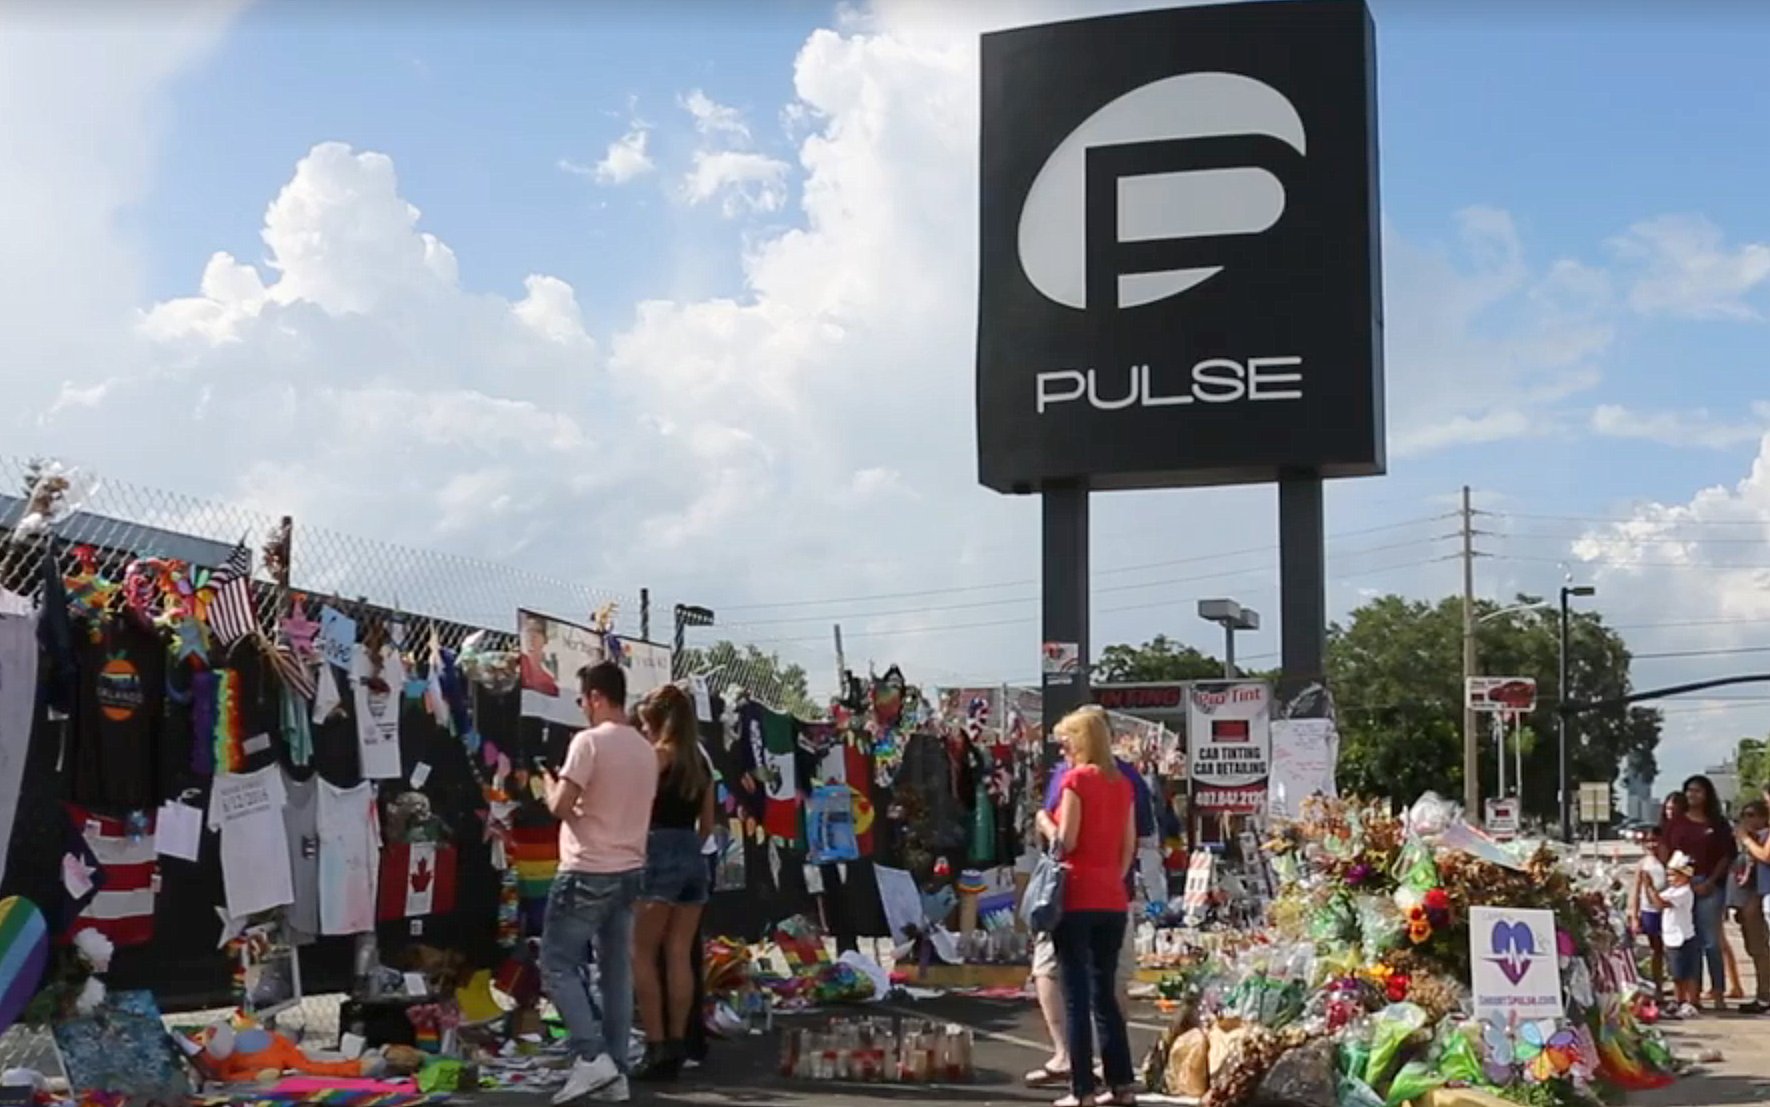 People travel to Pulse nightclub to honor the victims of the massacre